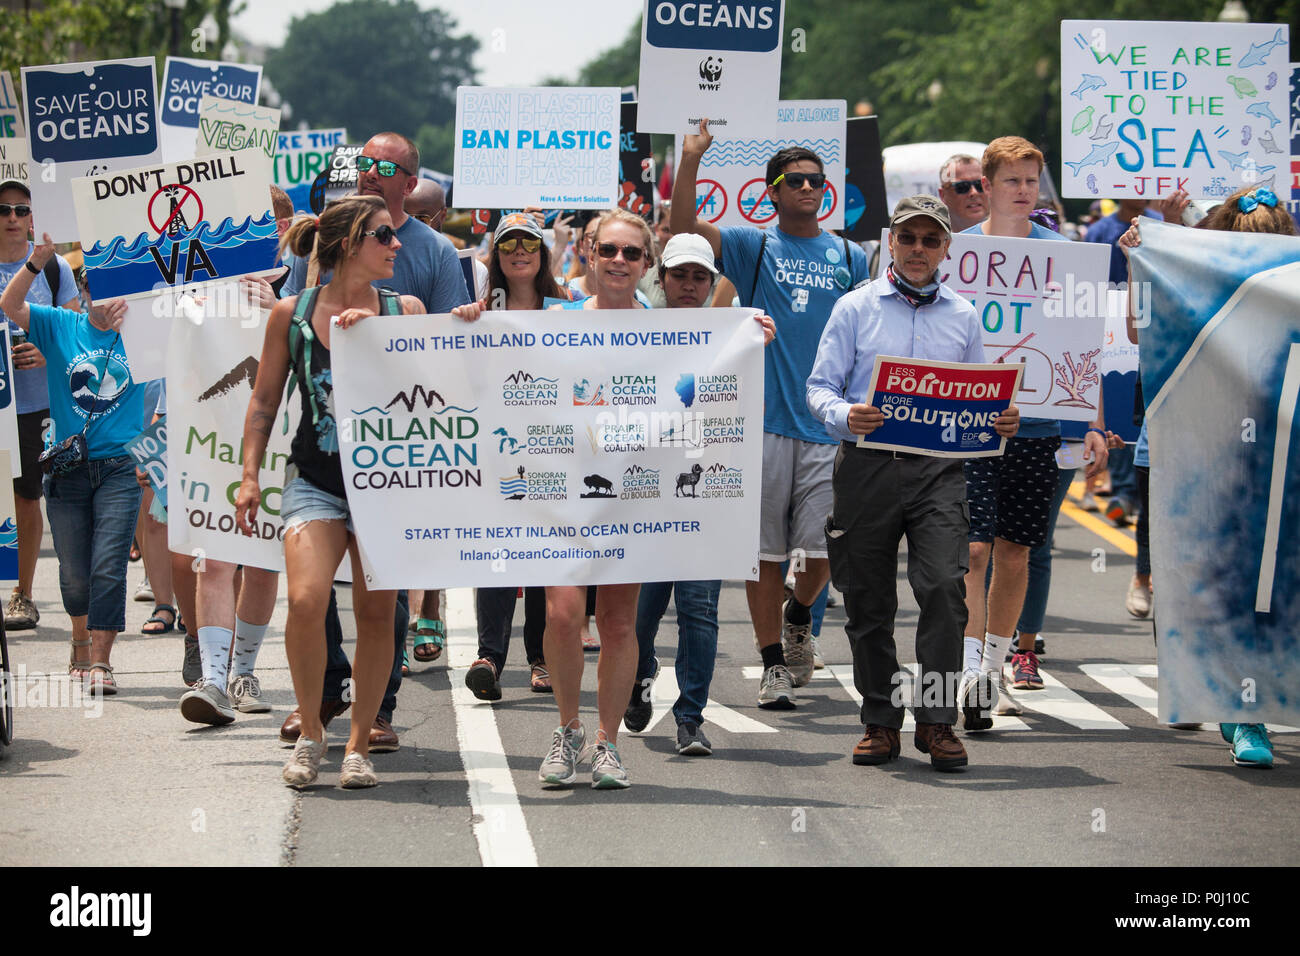 Washington DC, USA. 9th June 2018. Activists carry signs near the White House on the March For The Ocean in Washington, D.C., June 9, 2018. The inaugural March for the Ocean called attention to ocean issues including plastic pollution and overfishing at events in the U.S. Capital and around the United States. Credit: Robert Meyers/Alamy Live News Stock Photo